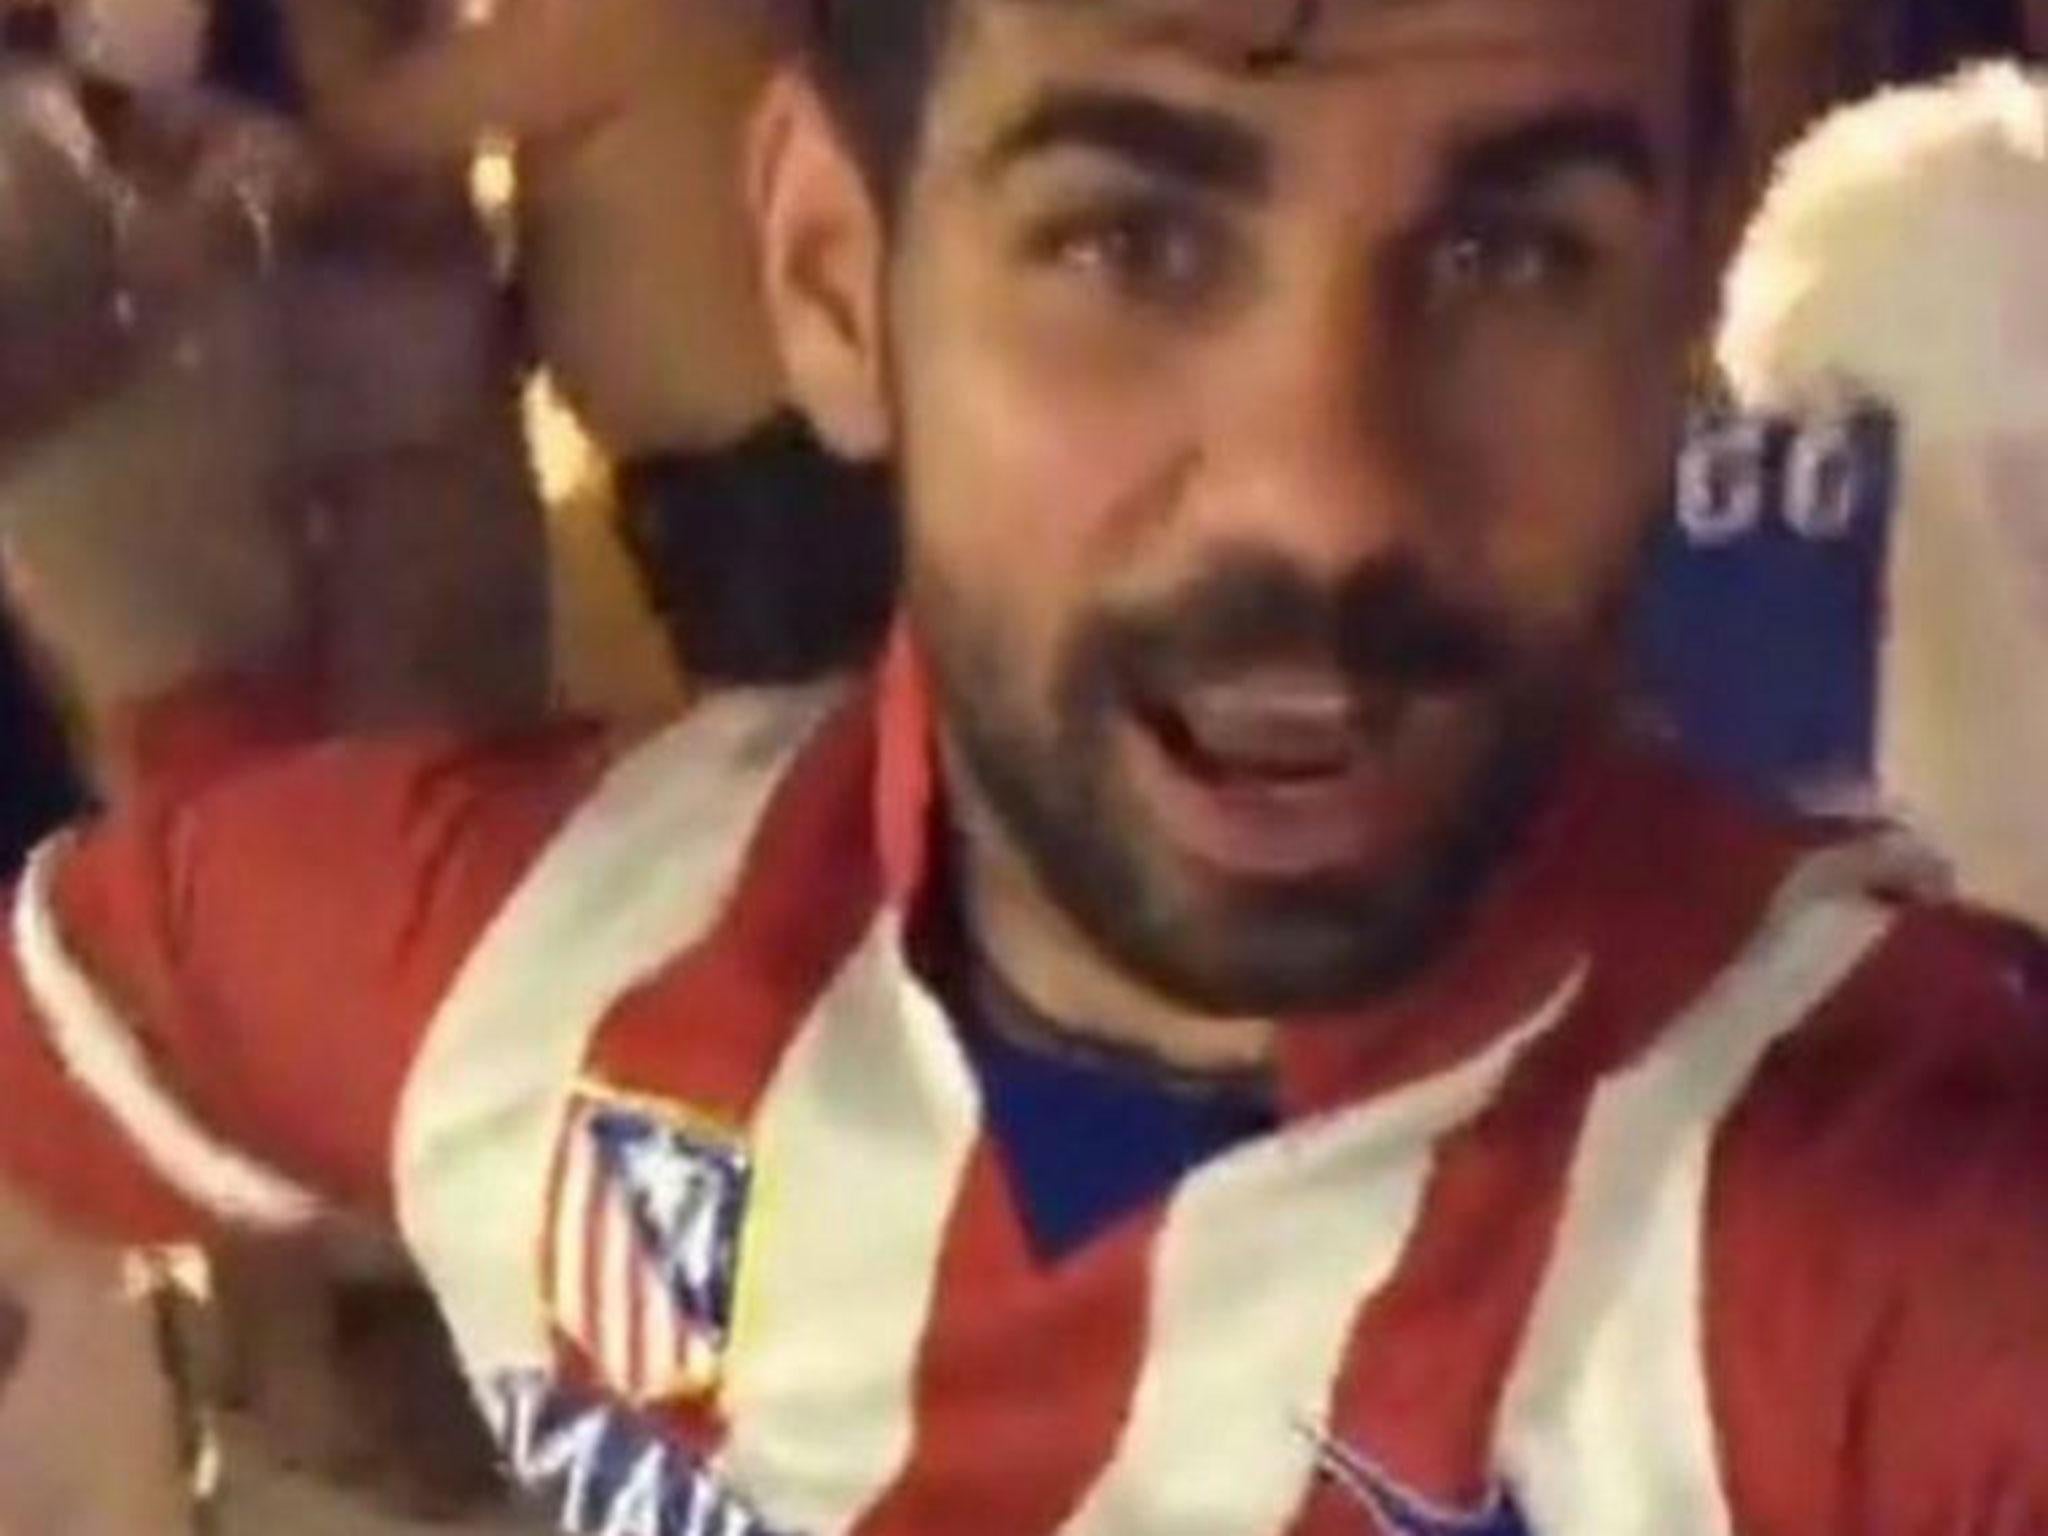 Diego Costa has been pictured partying in an Atletico Madrid shirt